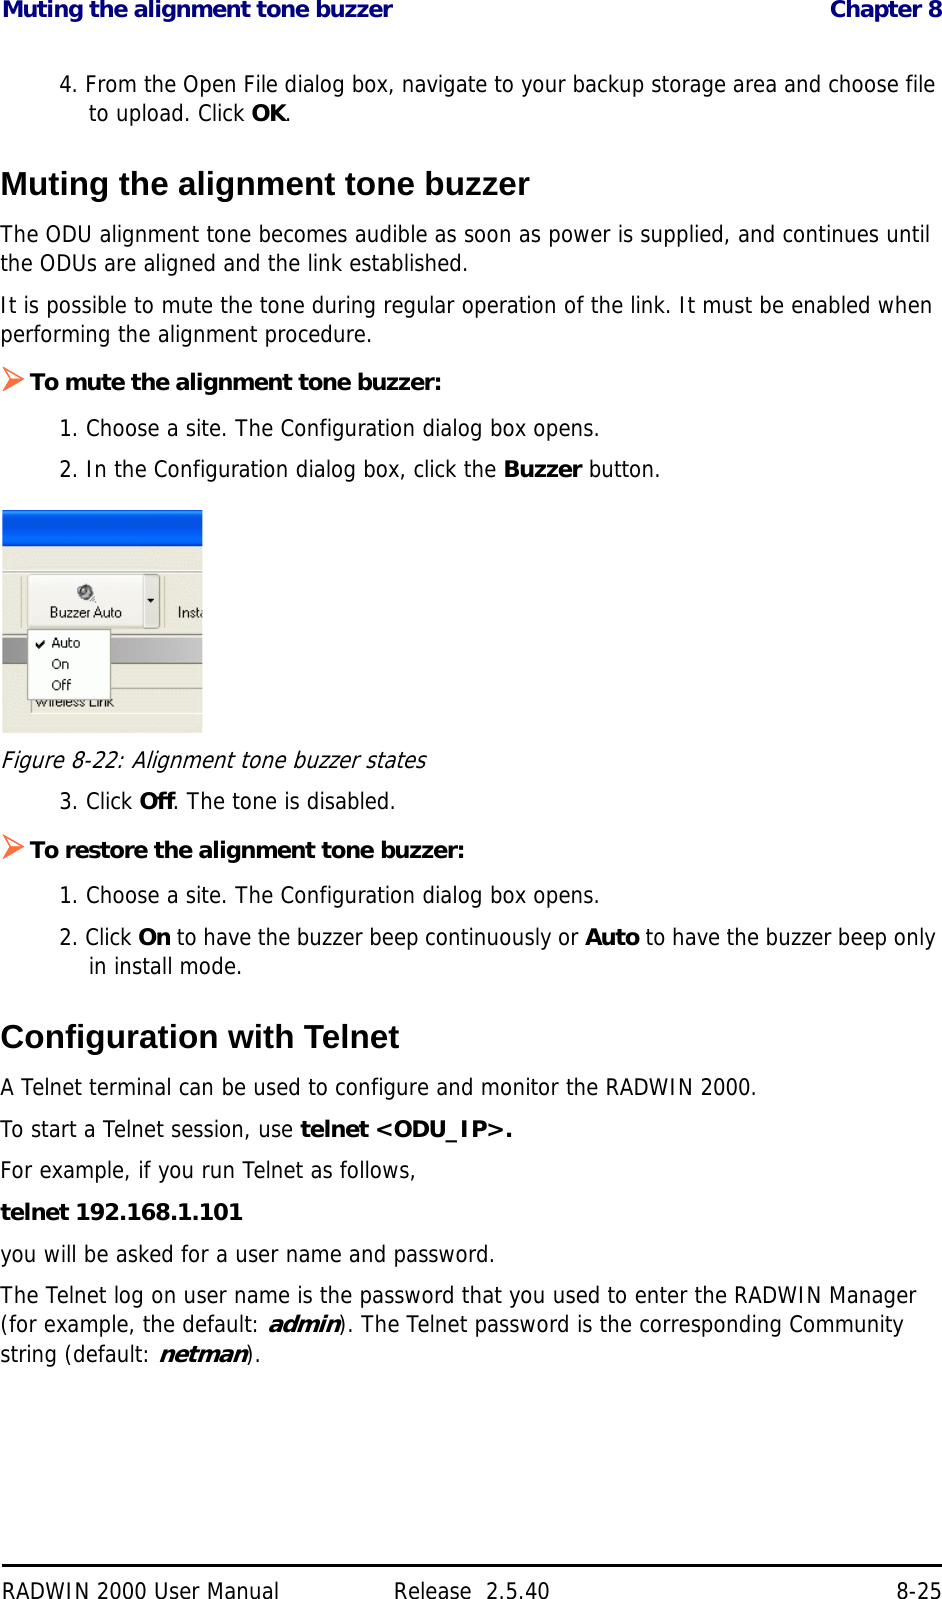 Muting the alignment tone buzzer Chapter 8RADWIN 2000 User Manual Release  2.5.40 8-254. From the Open File dialog box, navigate to your backup storage area and choose file to upload. Click OK.Muting the alignment tone buzzerThe ODU alignment tone becomes audible as soon as power is supplied, and continues until the ODUs are aligned and the link established.It is possible to mute the tone during regular operation of the link. It must be enabled when performing the alignment procedure.To mute the alignment tone buzzer:1. Choose a site. The Configuration dialog box opens.2. In the Configuration dialog box, click the Buzzer button.Figure 8-22: Alignment tone buzzer states3. Click Off. The tone is disabled.To restore the alignment tone buzzer:1. Choose a site. The Configuration dialog box opens.2. Click On to have the buzzer beep continuously or Auto to have the buzzer beep only in install mode.Configuration with TelnetA Telnet terminal can be used to configure and monitor the RADWIN 2000.To start a Telnet session, use telnet &lt;ODU_IP&gt;.For example, if you run Telnet as follows,telnet 192.168.1.101you will be asked for a user name and password.The Telnet log on user name is the password that you used to enter the RADWIN Manager (for example, the default: admin). The Telnet password is the corresponding Community string (default: netman).